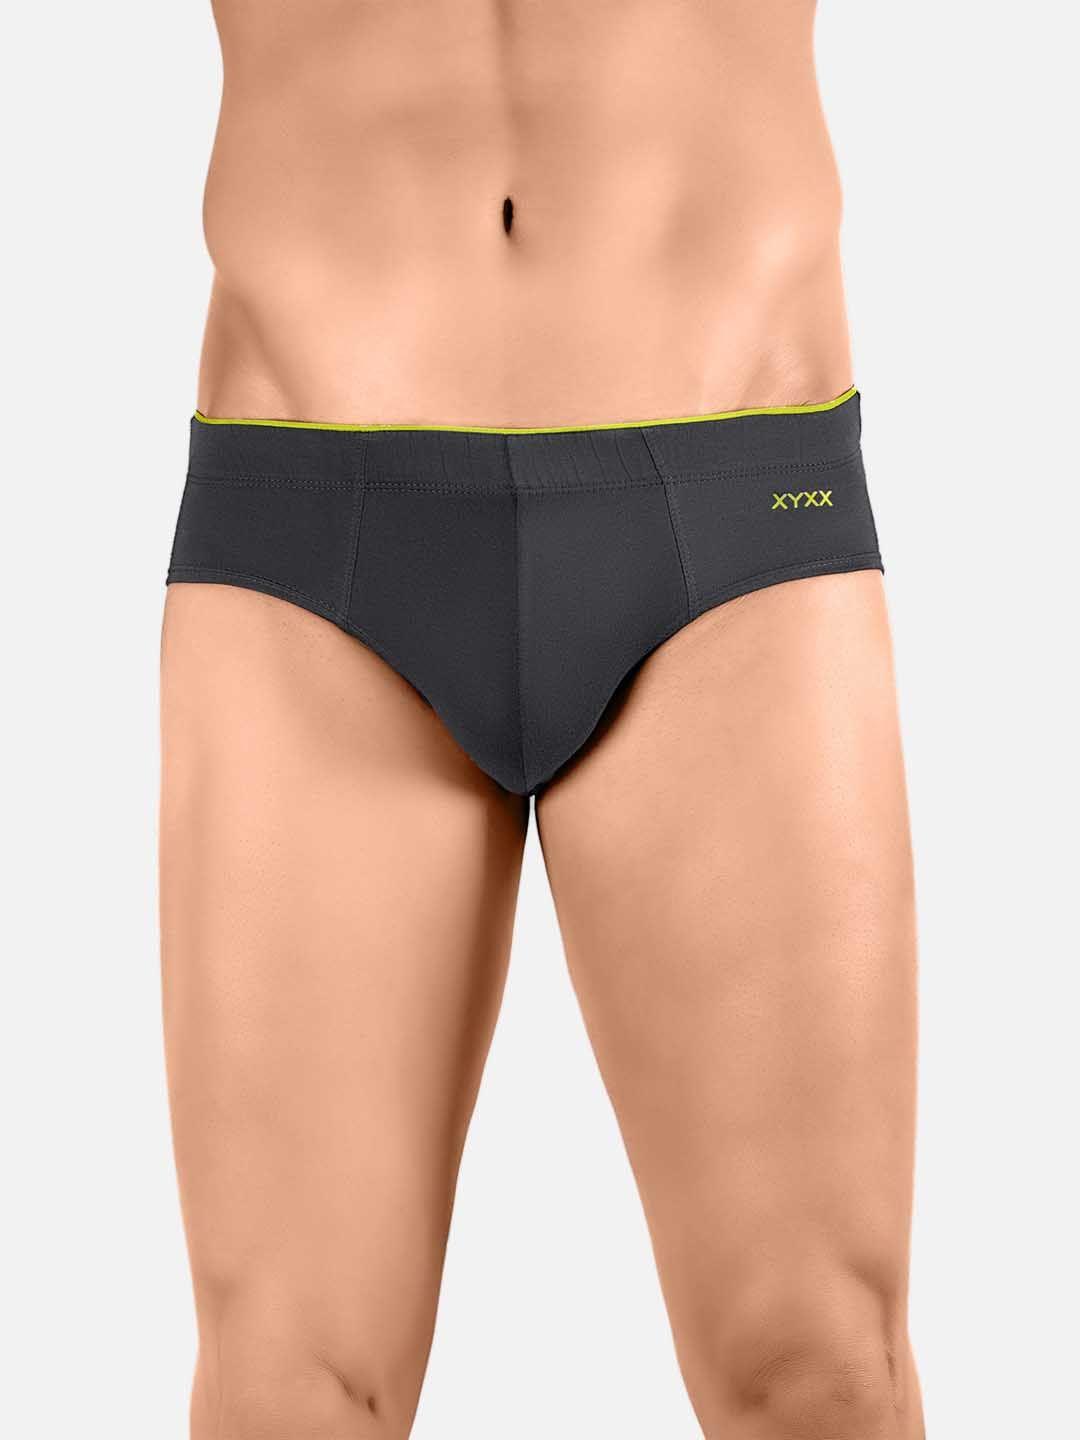 xyxx men charcoal-grey solid antimicrobial basic briefs xybrf53